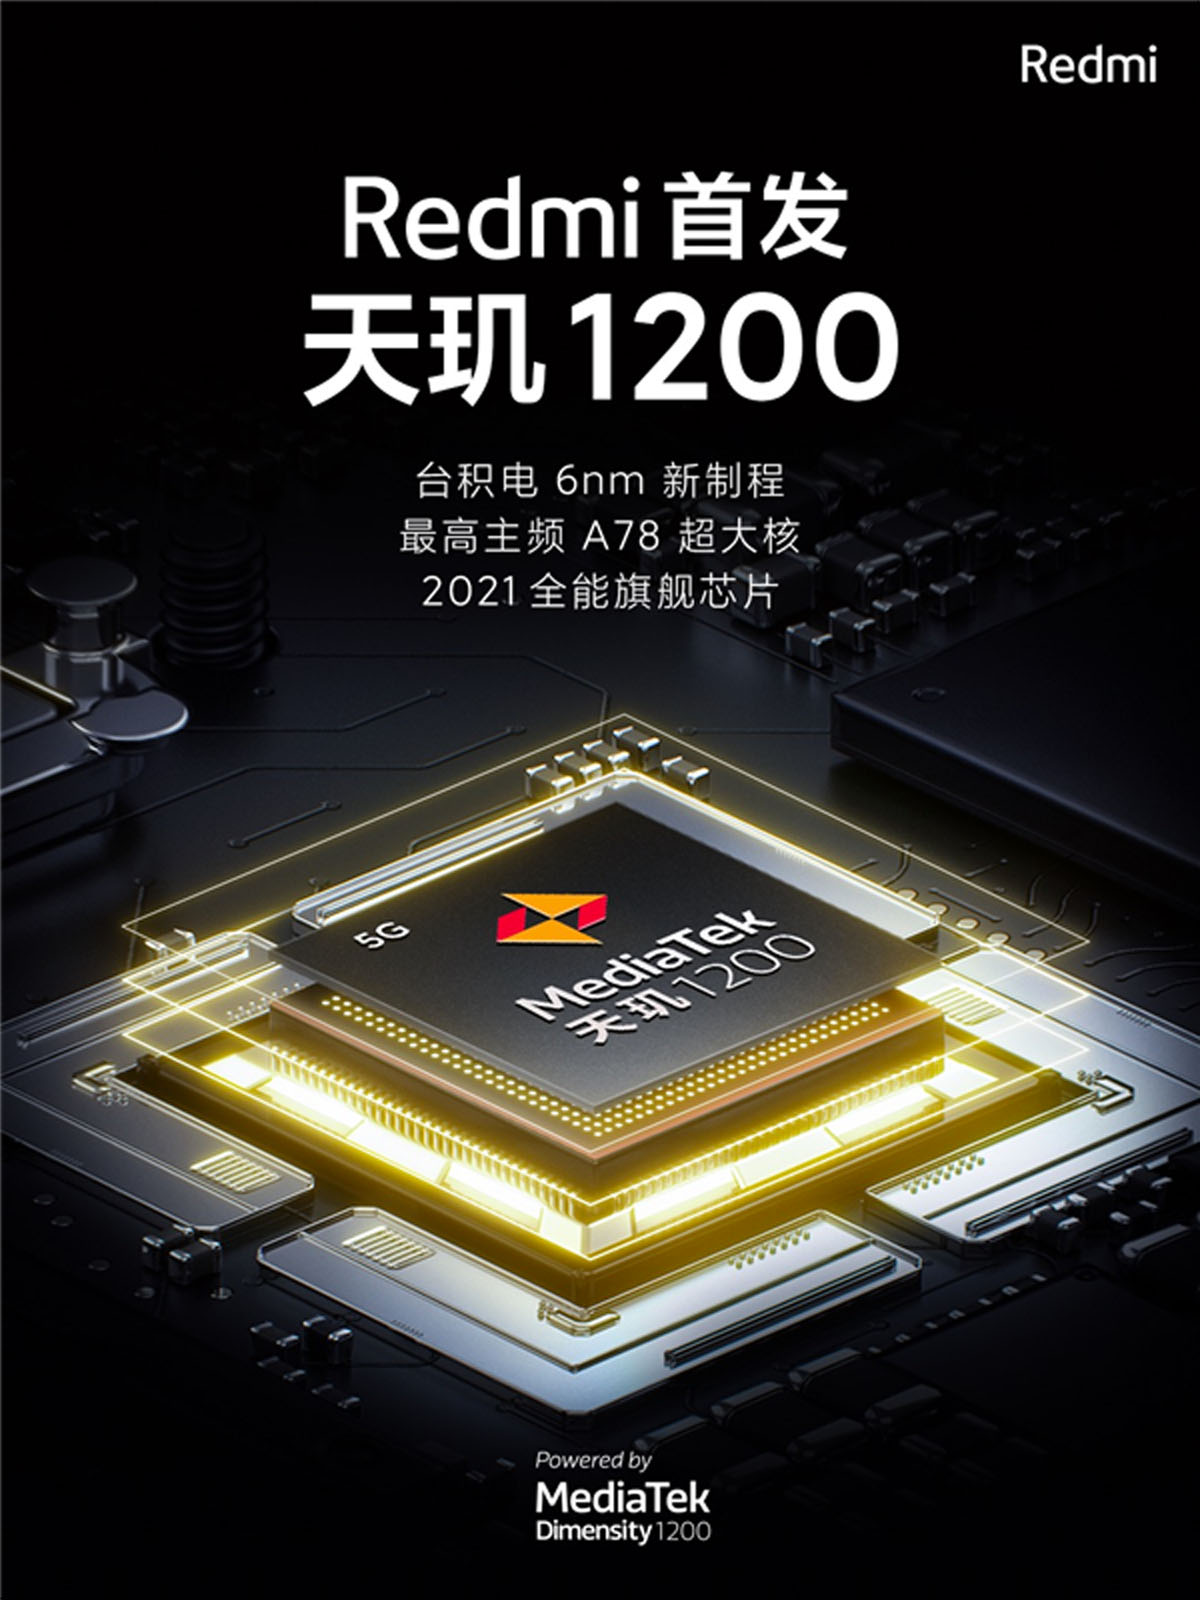 Redmi Gaming Smartphone Physical Shoulder Buttons 5000mah battery